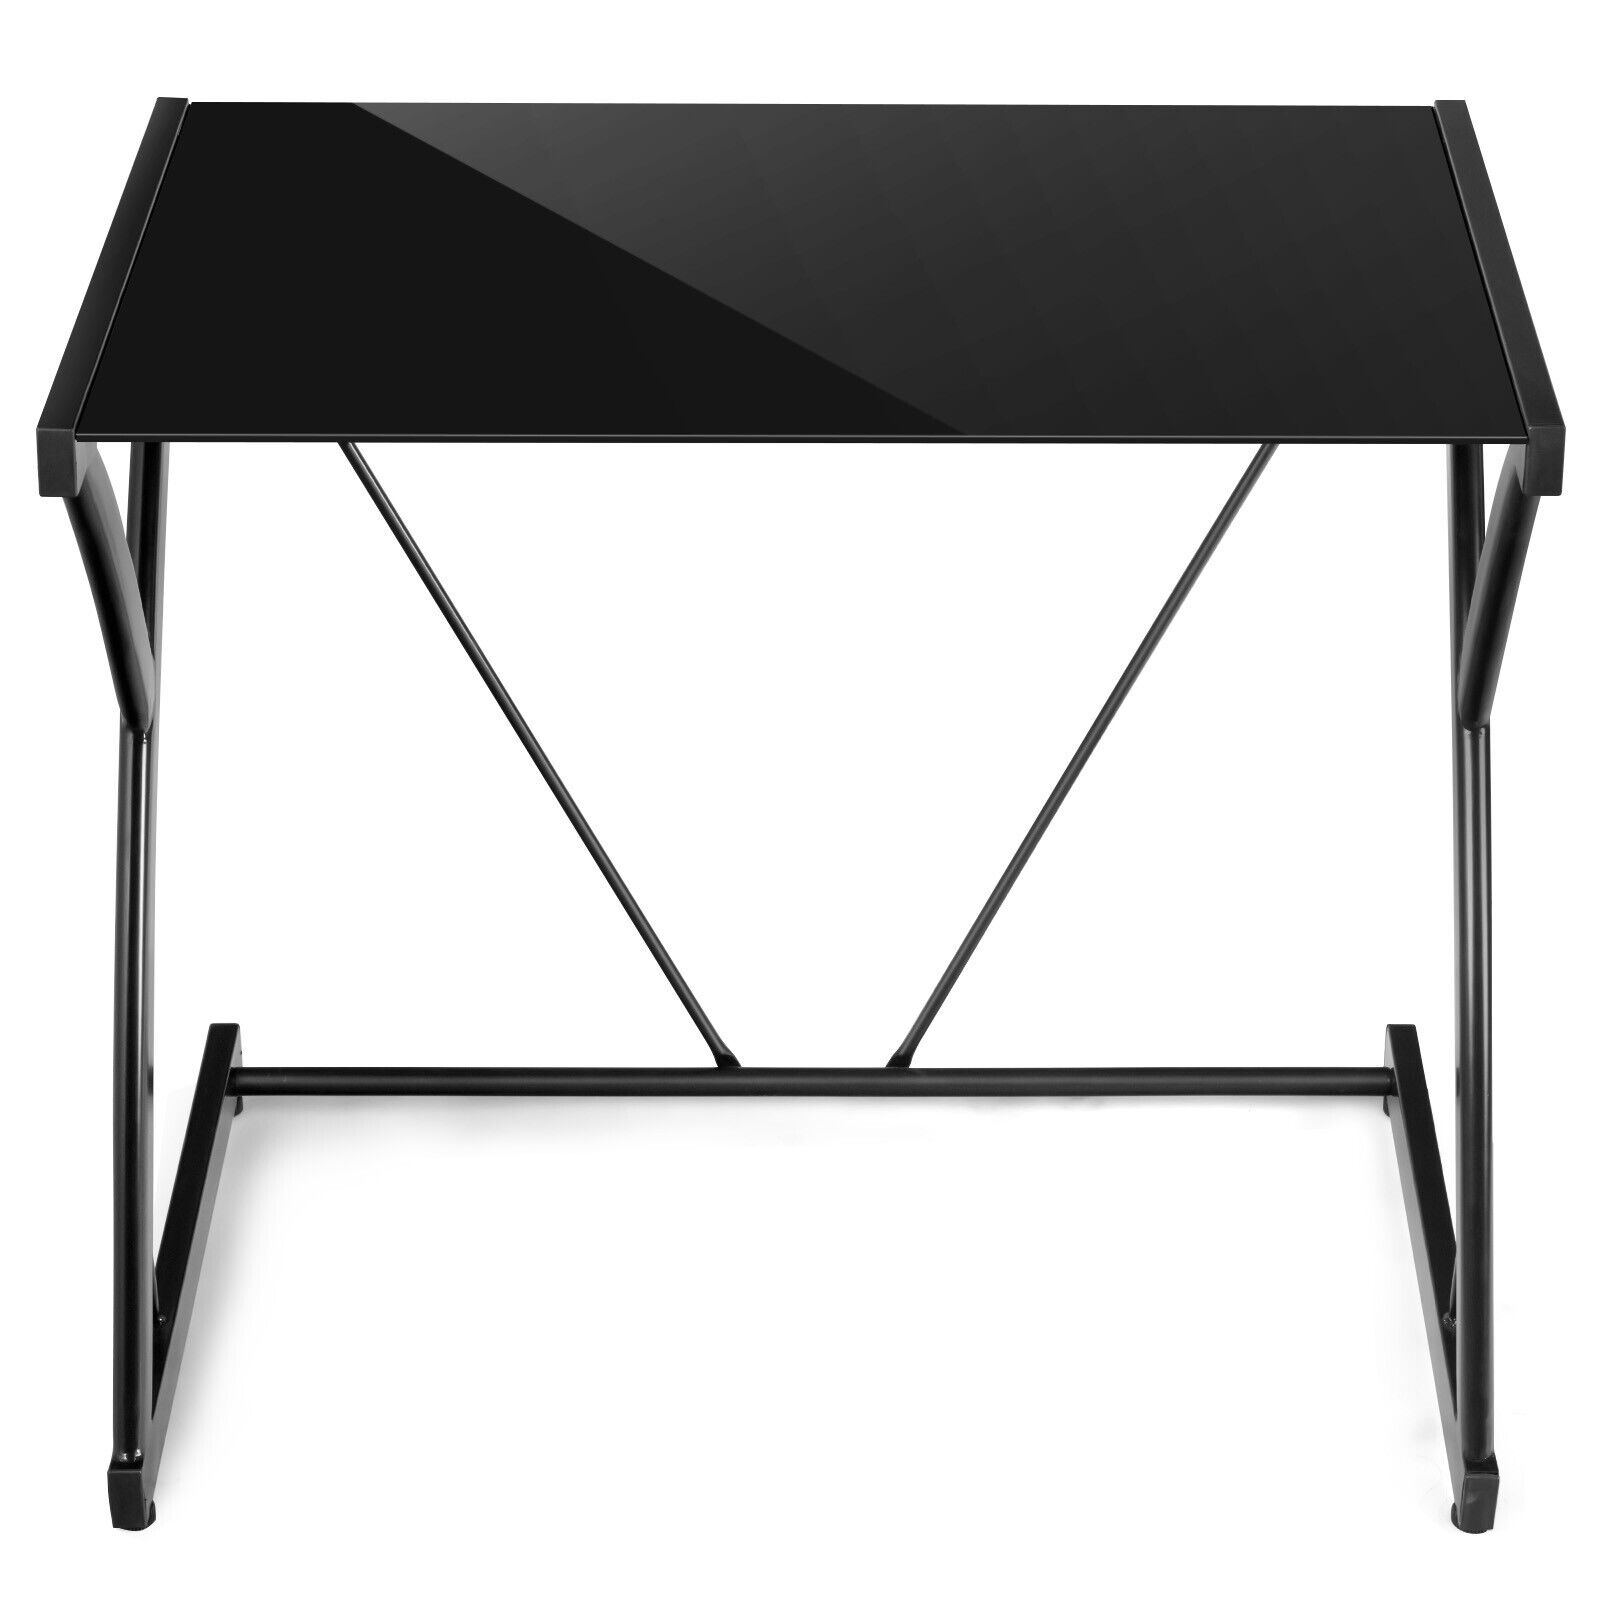 Z-Shaped_Computer_Desk_with_Tempered_Glass_Table_Top-7.jpg